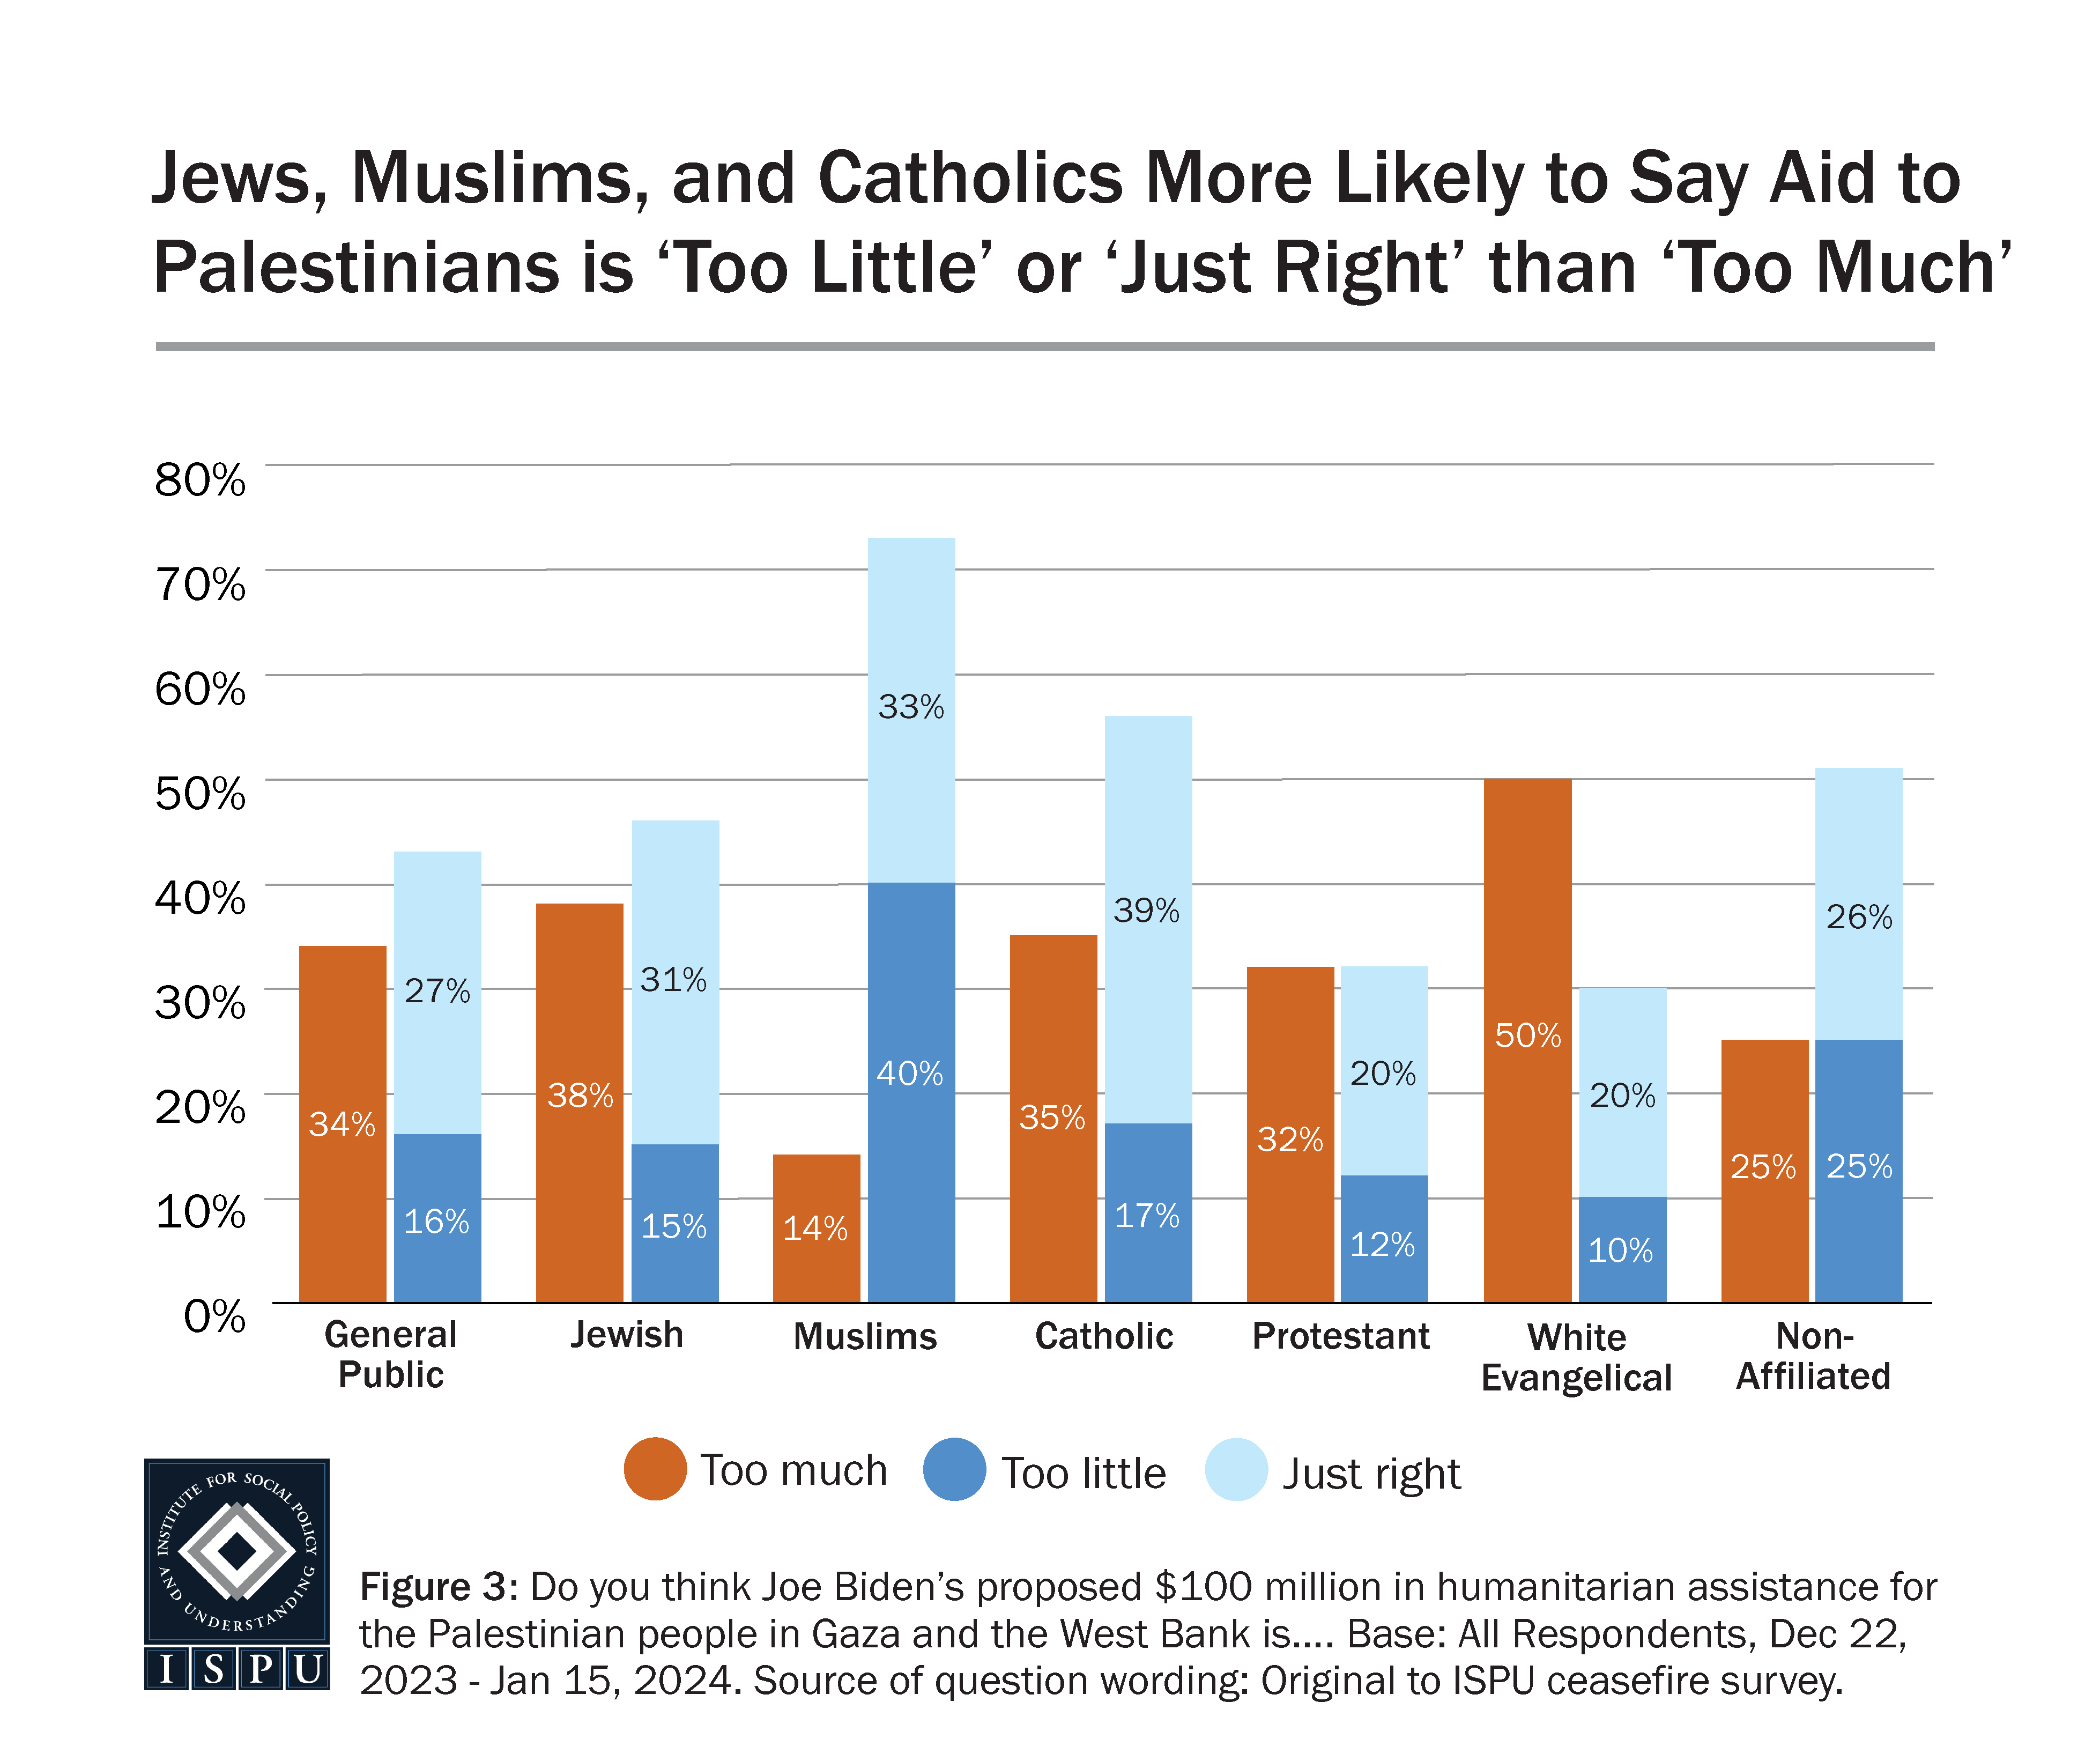 A bar graph showing views on proposed U.S. humanitarian aid for Palestinian’s by religious groups and the general public.